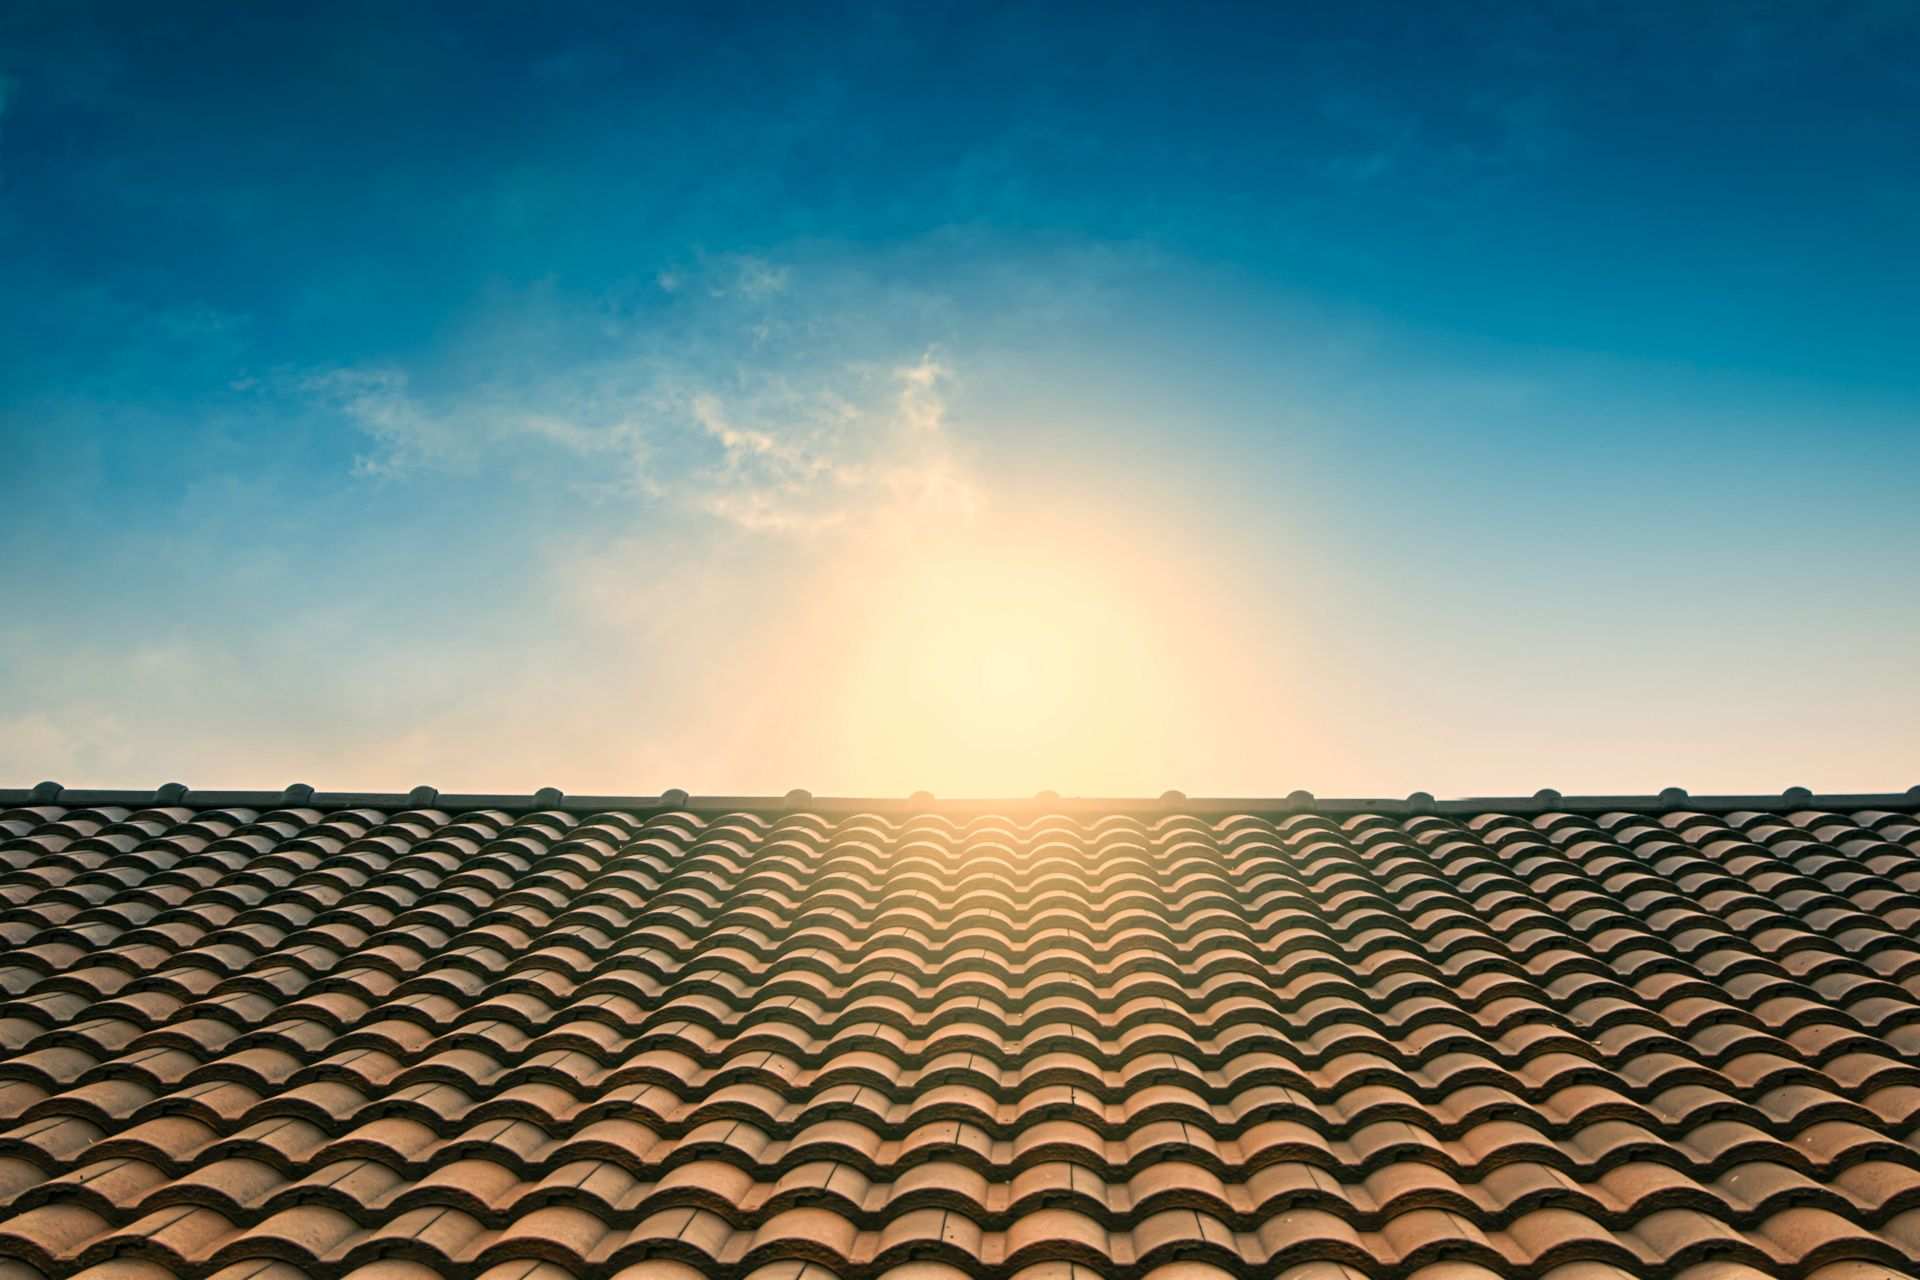 Sun rising over roof of a house